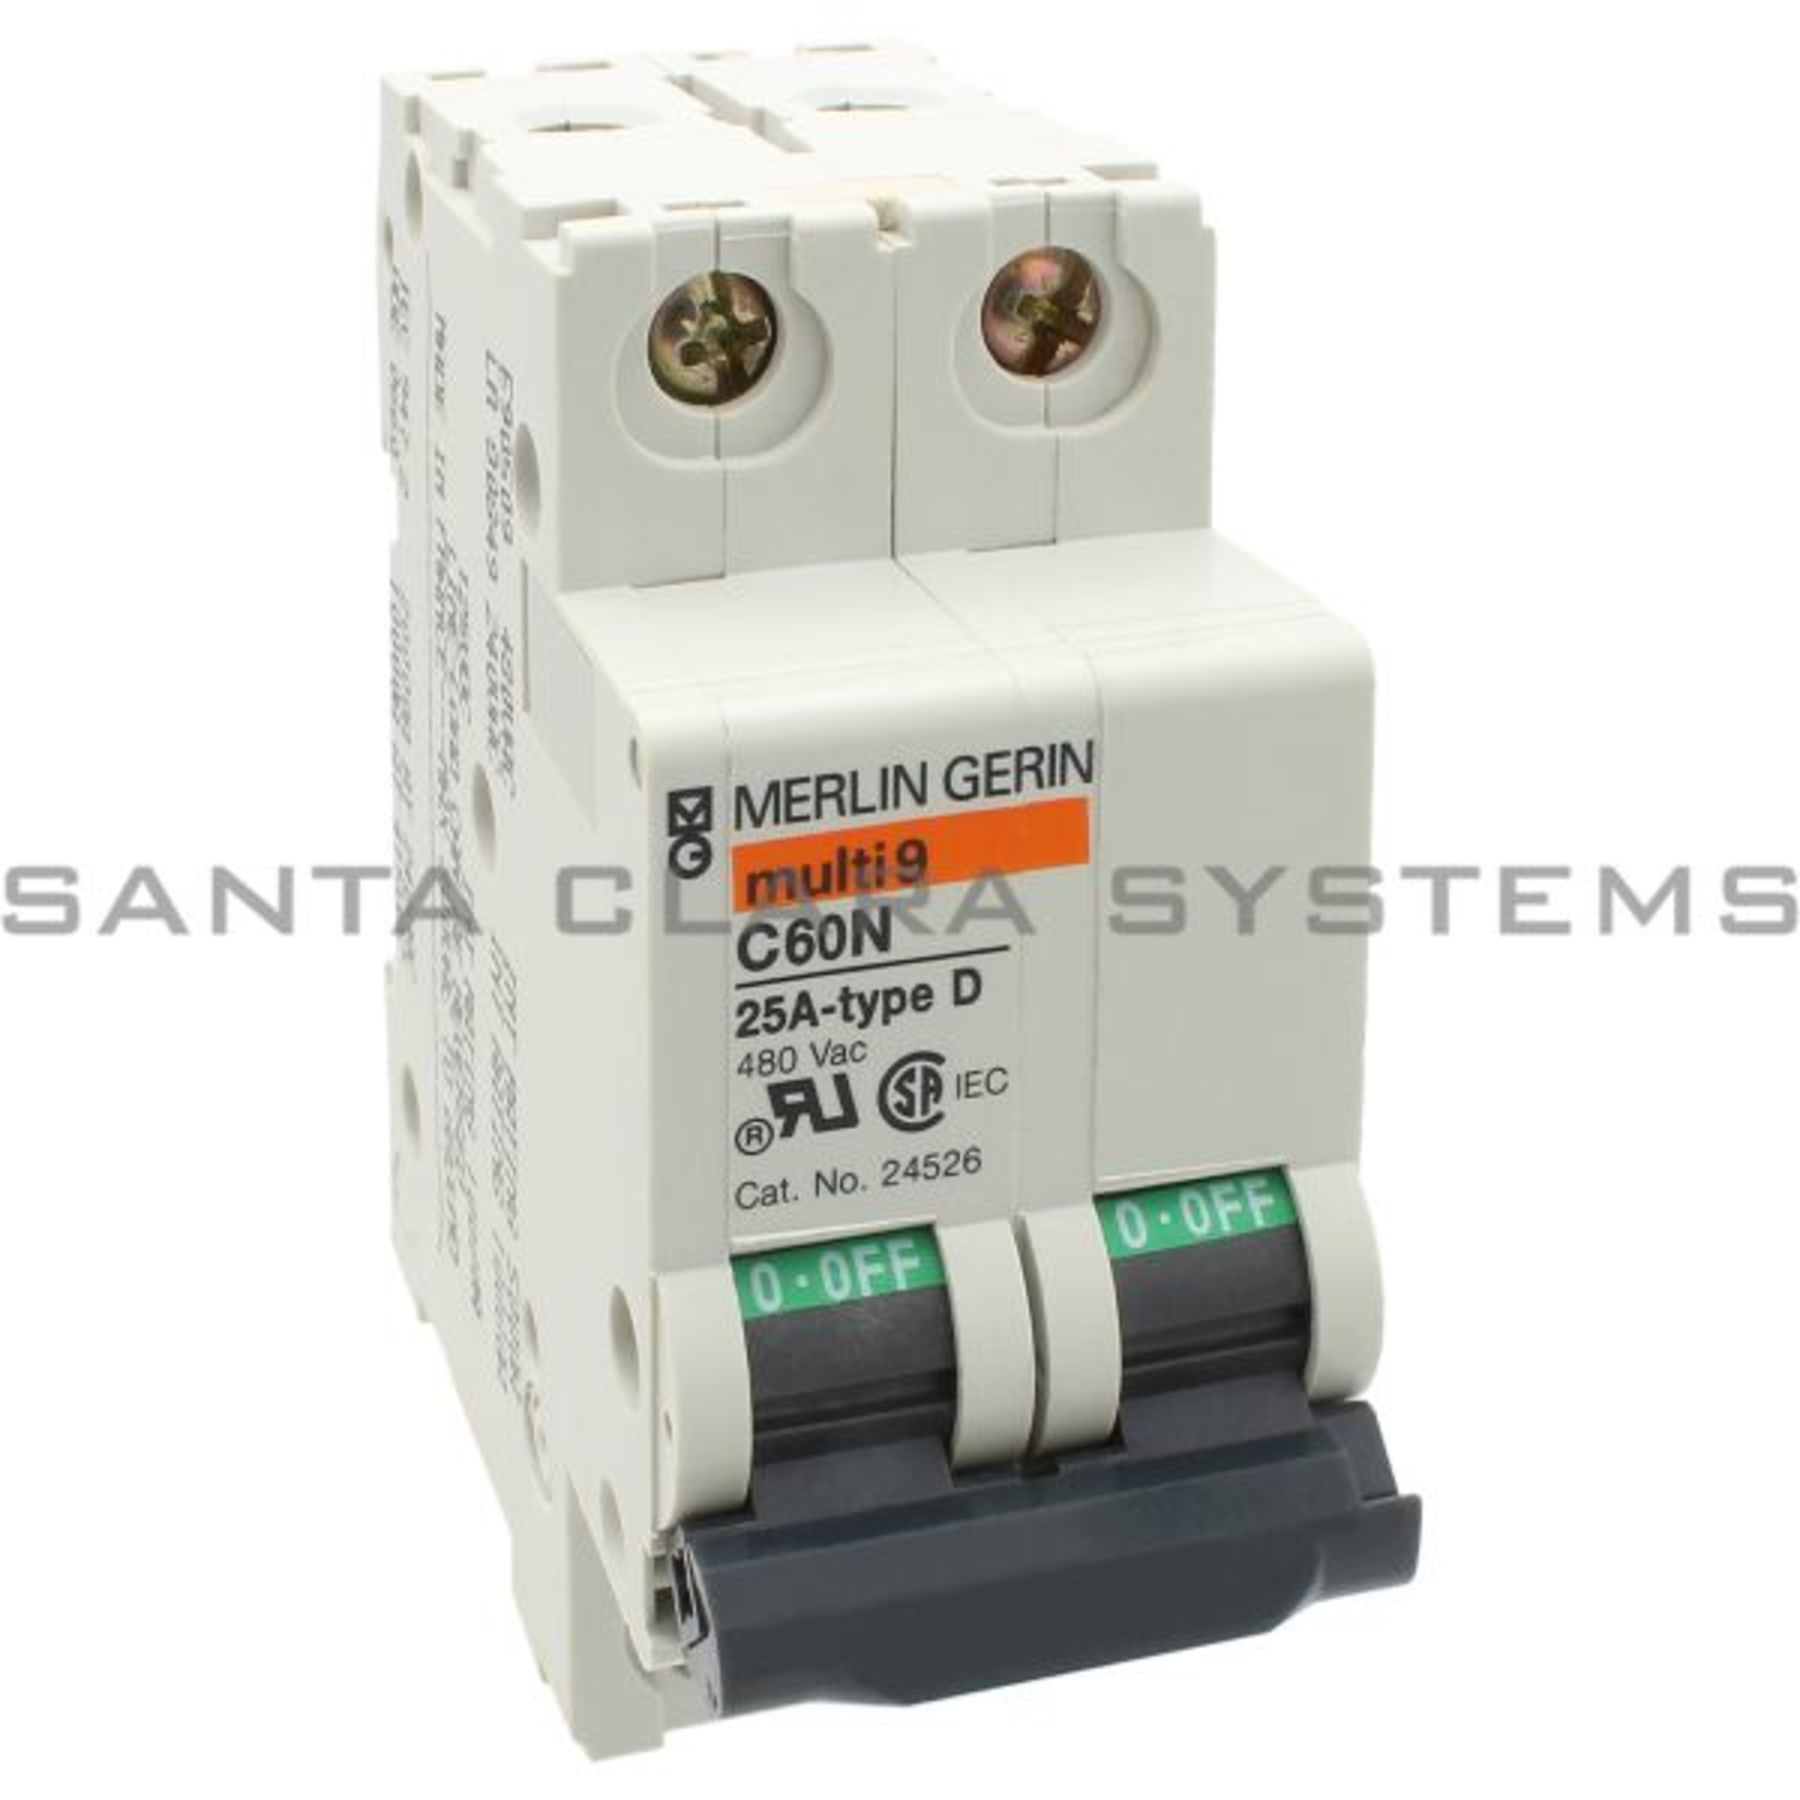 Square D Supplementary Protector C60N 25A Type D Merlin Gerin 24526  In-Stock. Ships Today - Santa Clara Systems